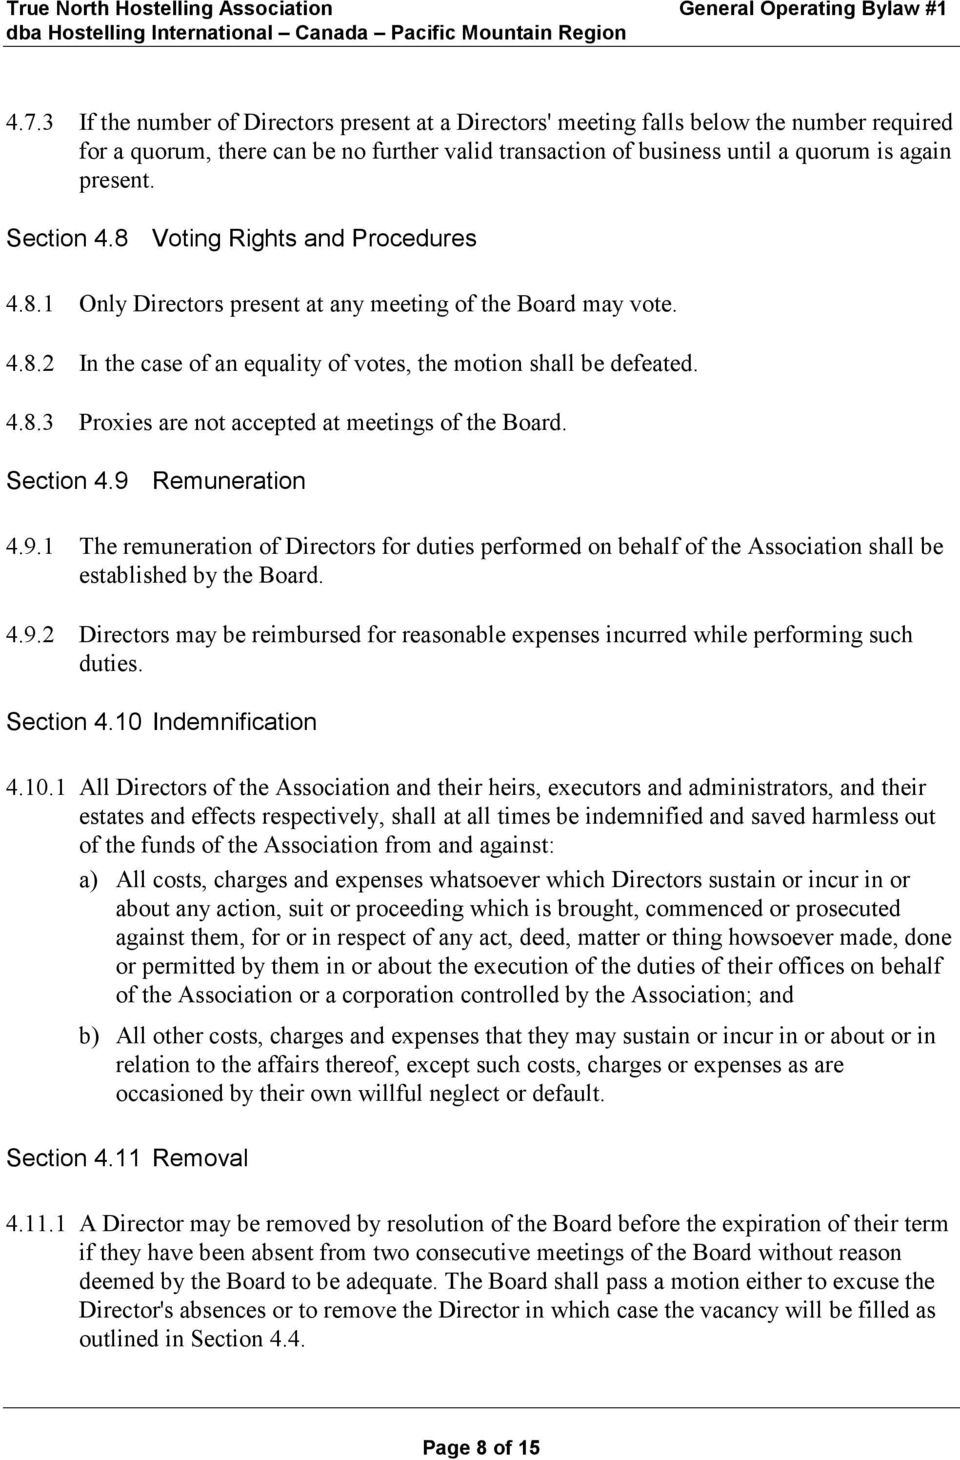 Section 4.9 Remuneration 4.9.1 The remuneration of Directors for duties performed on behalf of the Association shall be established by the Board. 4.9.2 Directors may be reimbursed for reasonable expenses incurred while performing such duties.